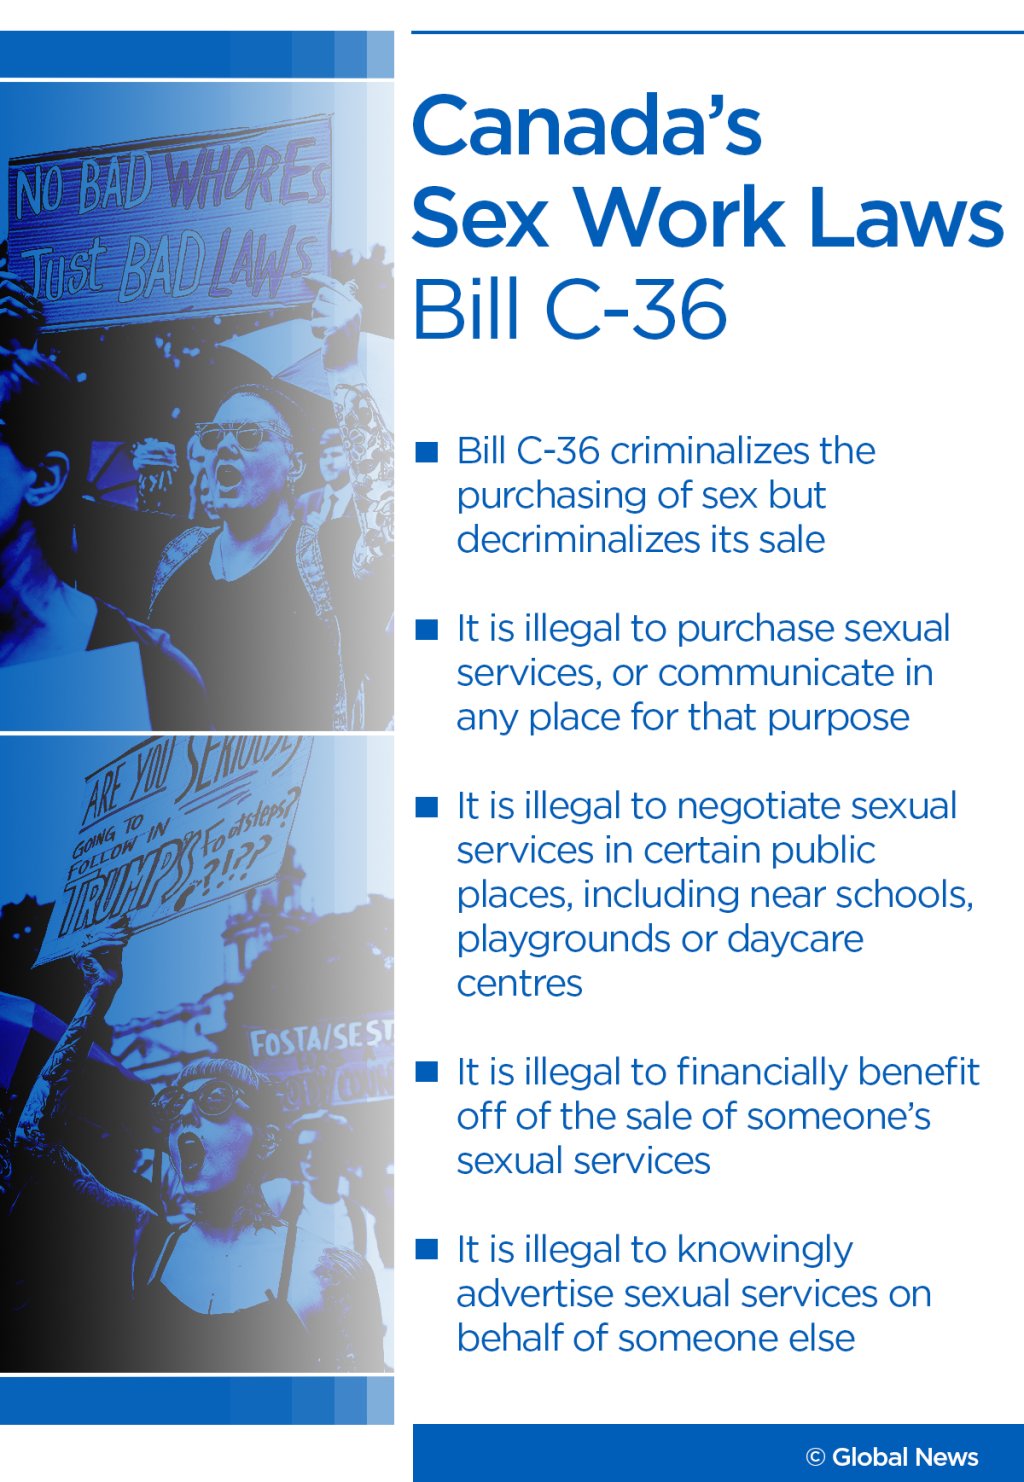 Sex Workers Say Canadas Laws Put Them In Danger — And Demand The New Government Fix Them 9844